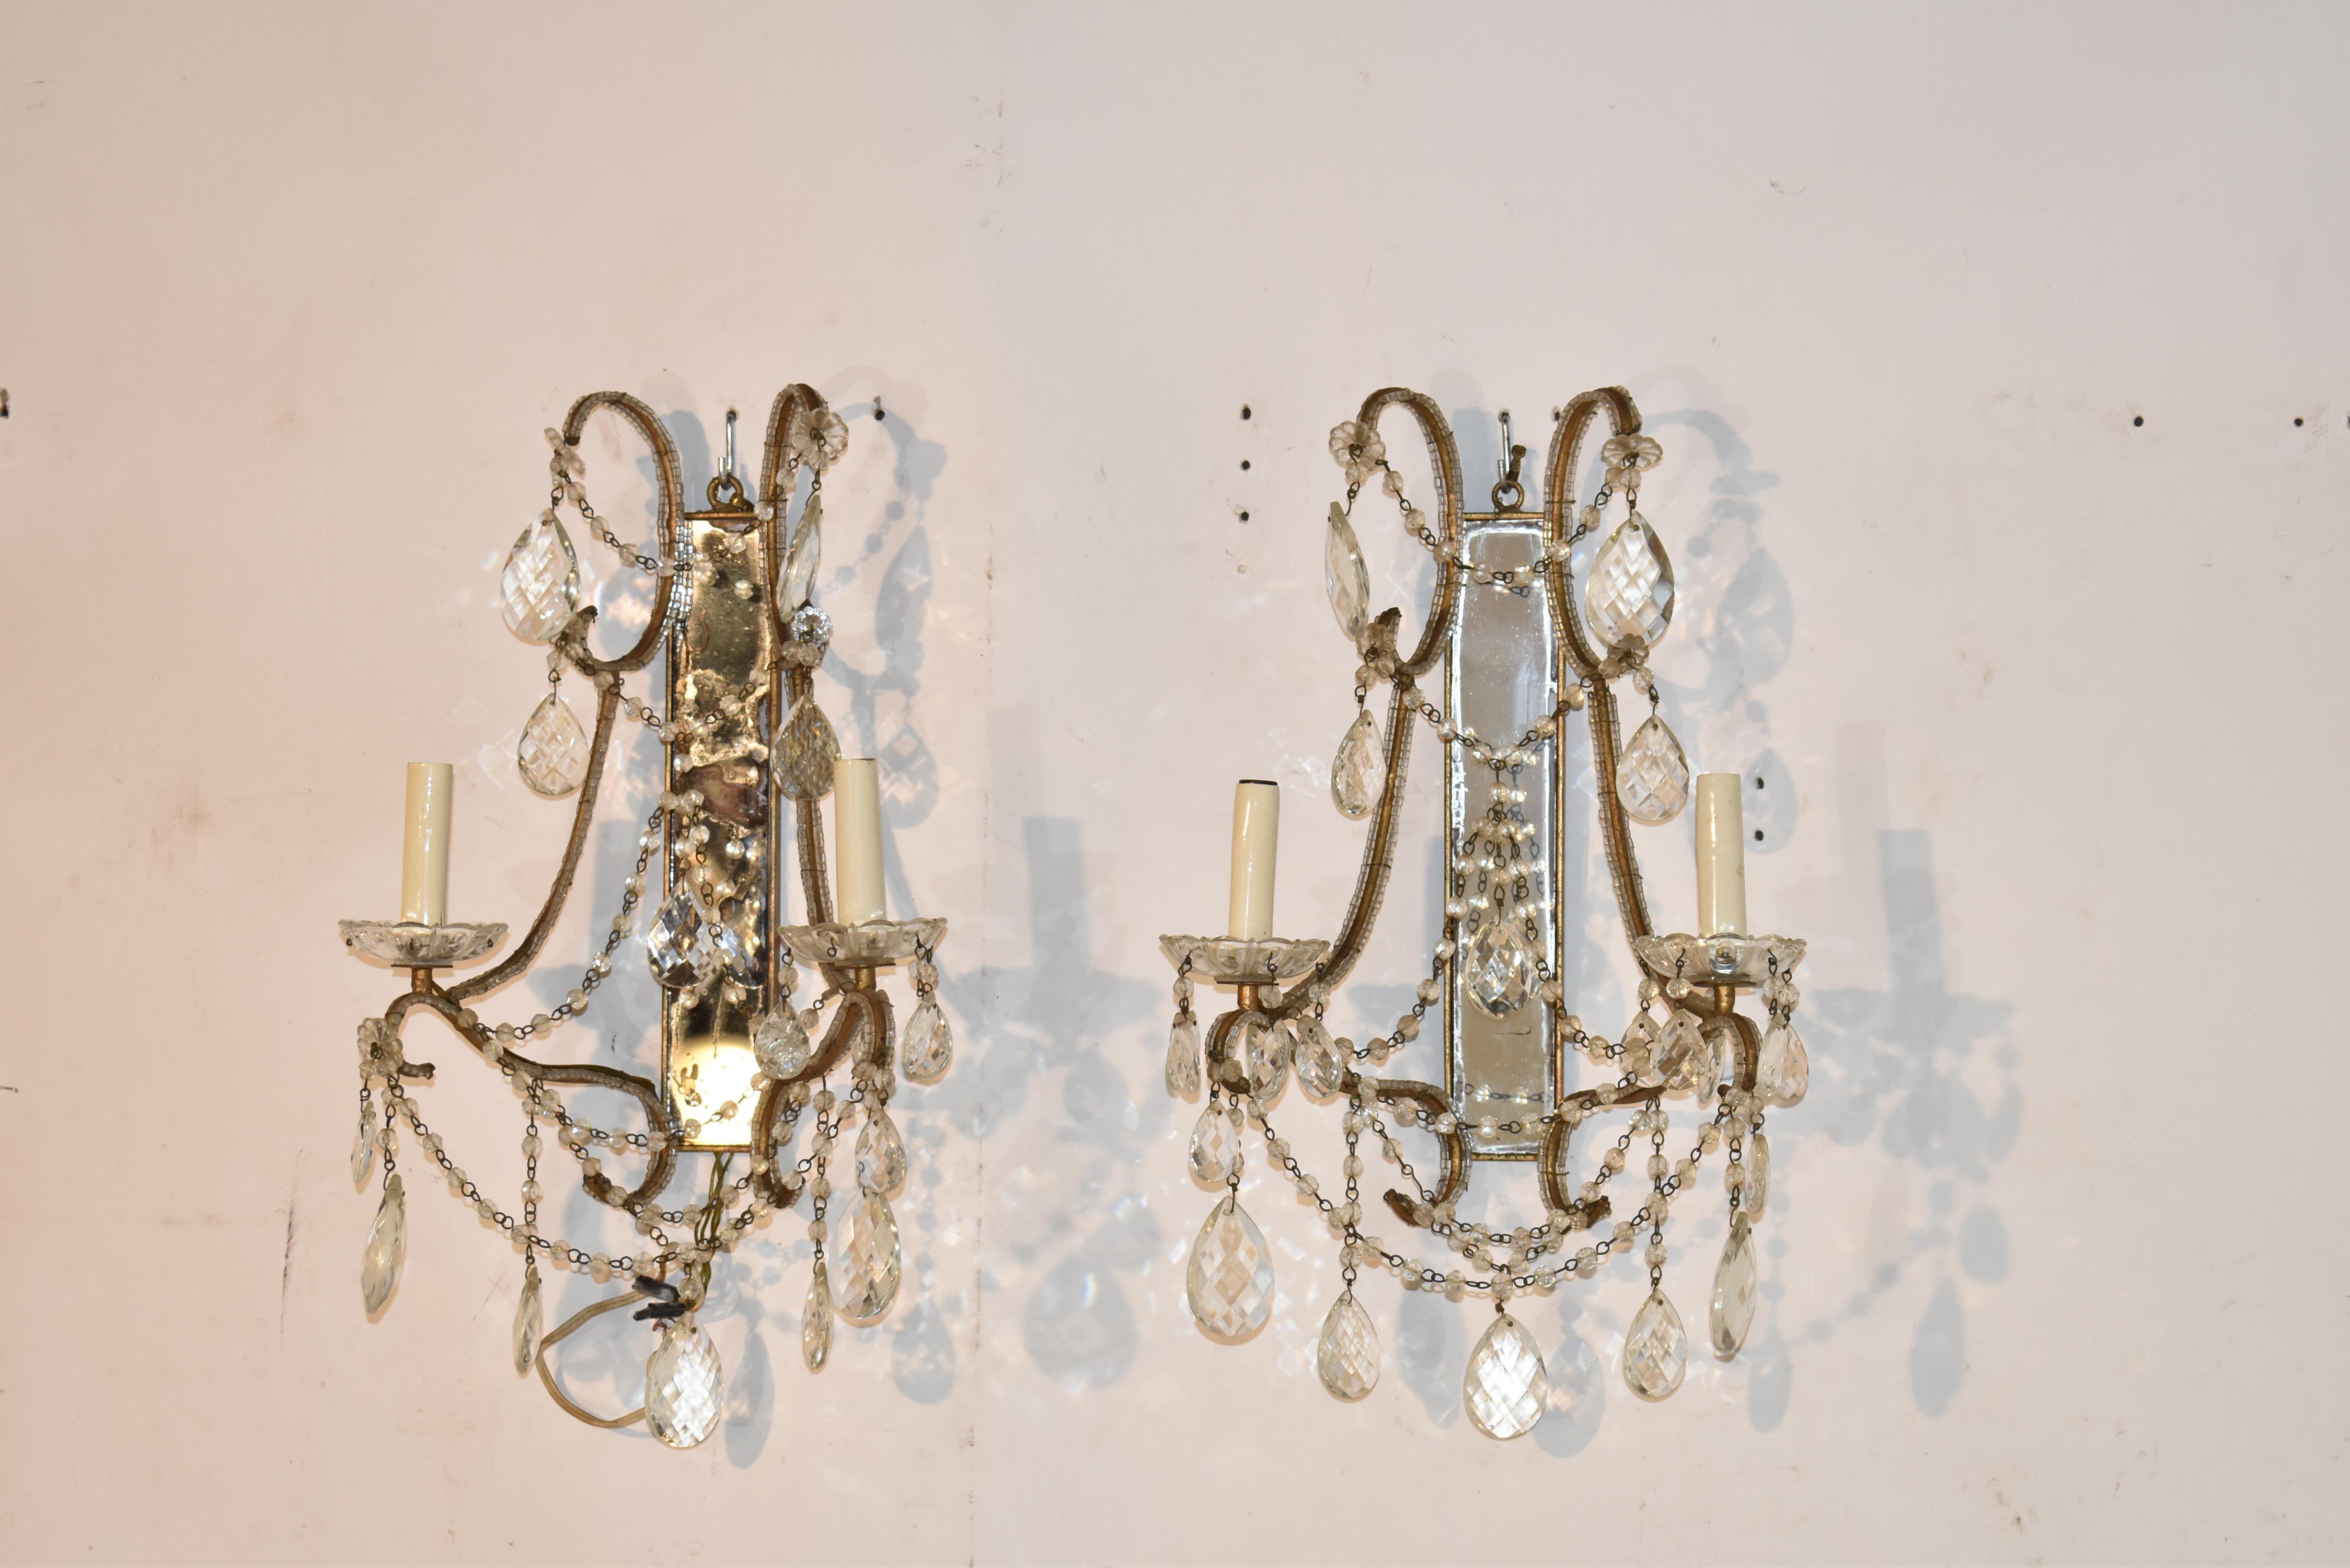 Pair of Italian Mirrored Wall Sconces, Circa 1960's In Good Condition For Sale In High Point, NC